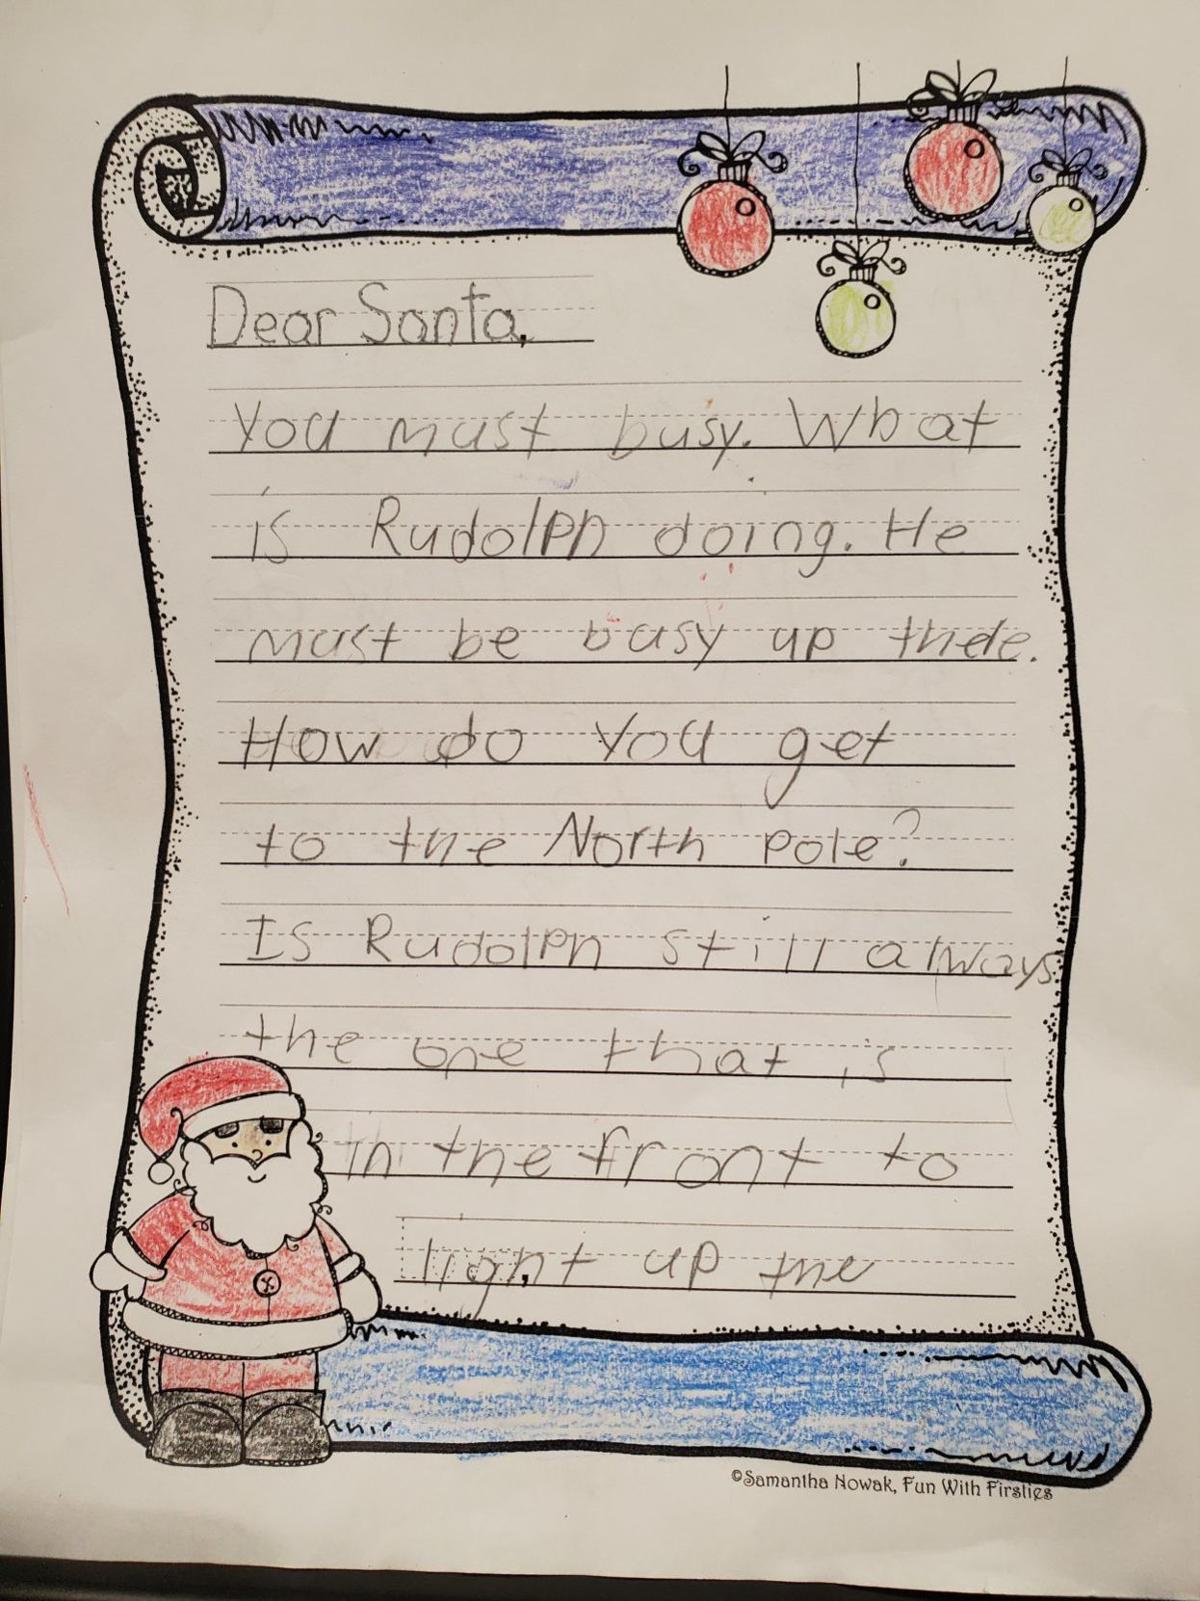 Culpeper Second Graders Send Their Christmas Wishes To The North Pole Latest News Starexponent Com - remote spy roblox 2019 roblox free ninja animation